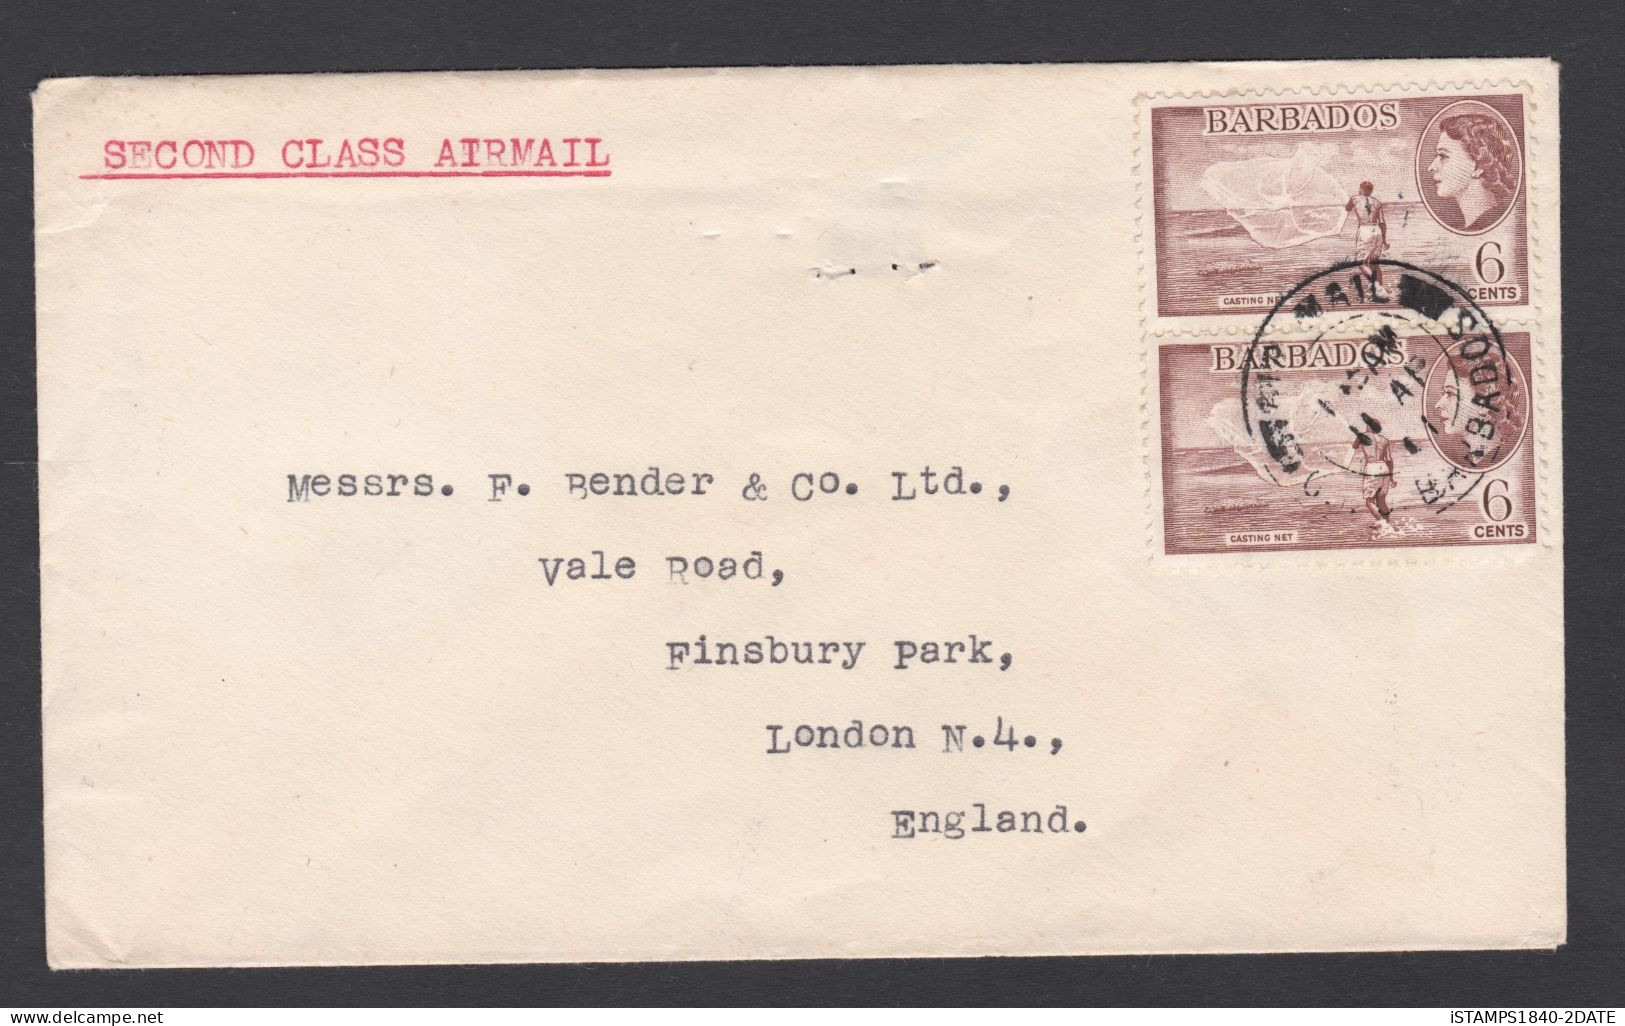 00406/ Barbados 1961 Air Mail (2nd Class) To England Sg294 6c Red Brown Vert Pair Fine Used - Barbados (...-1966)